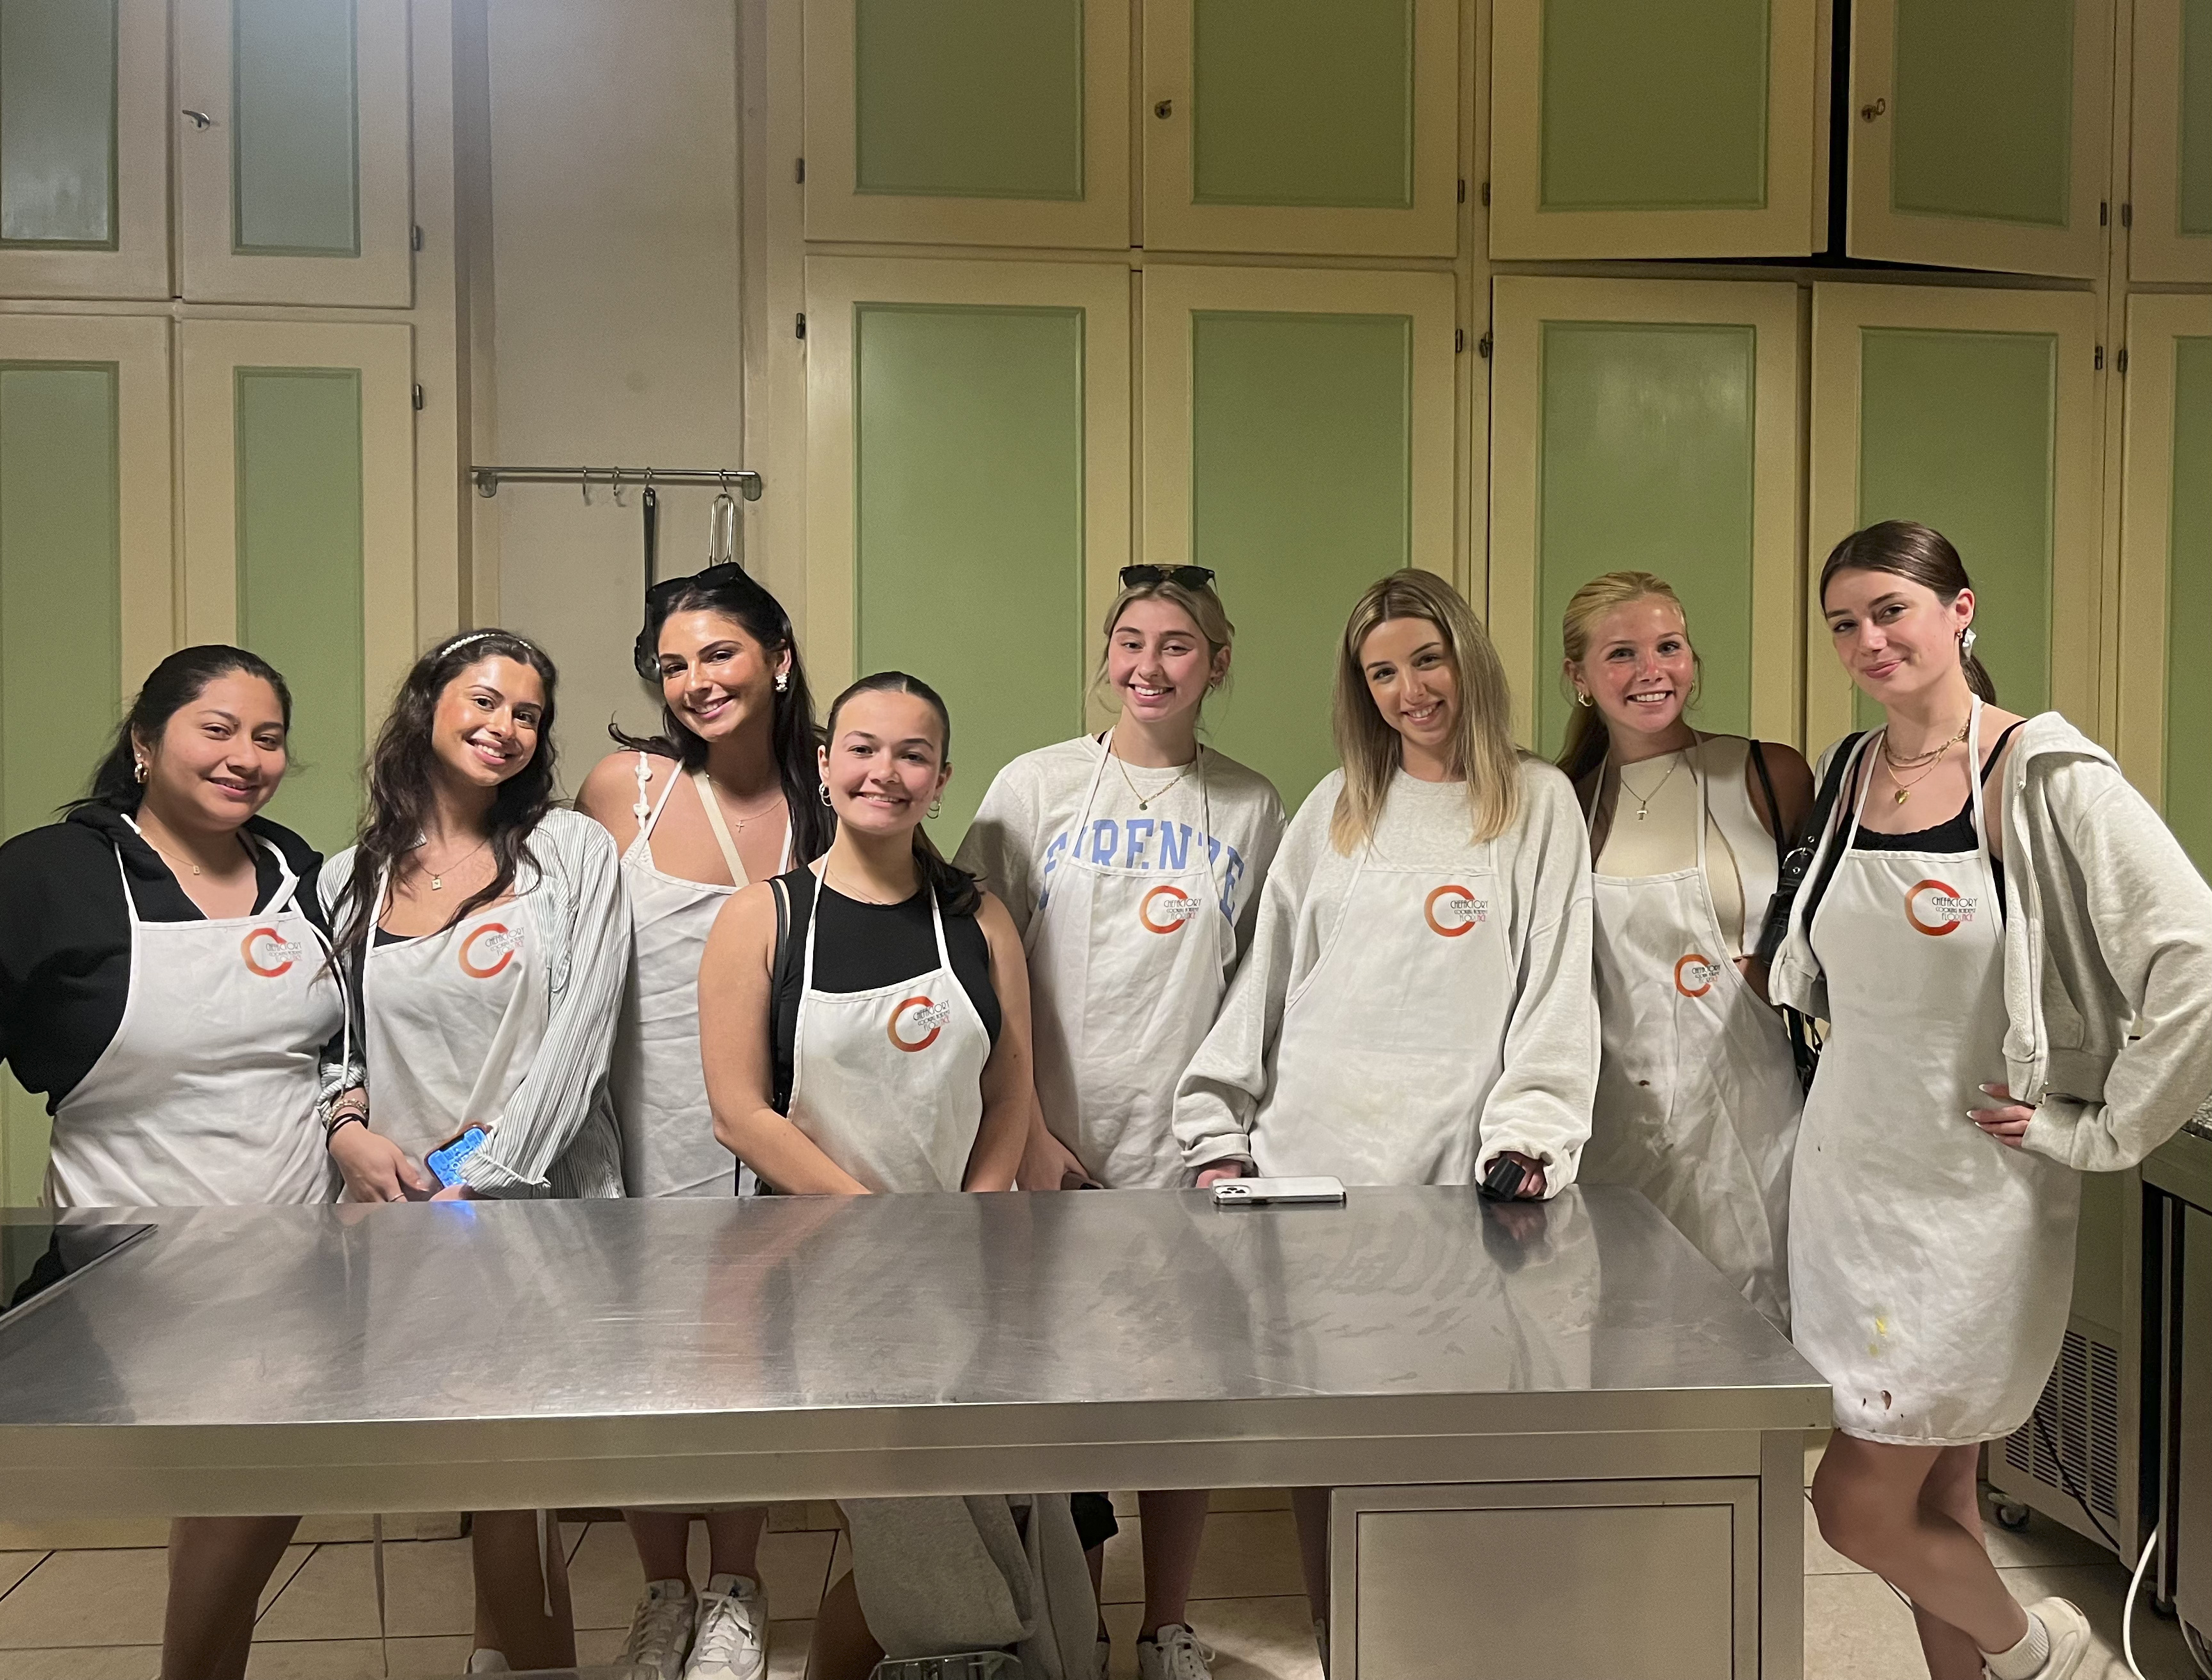 Public relations professor Lindsay McCluskey and her class took a trip to Florence, Italy, for their “Travel and Tourism” course. Students learned about overtourism, how tourism is impacting the local economy and how Italians and Americans respond differently to media communications.